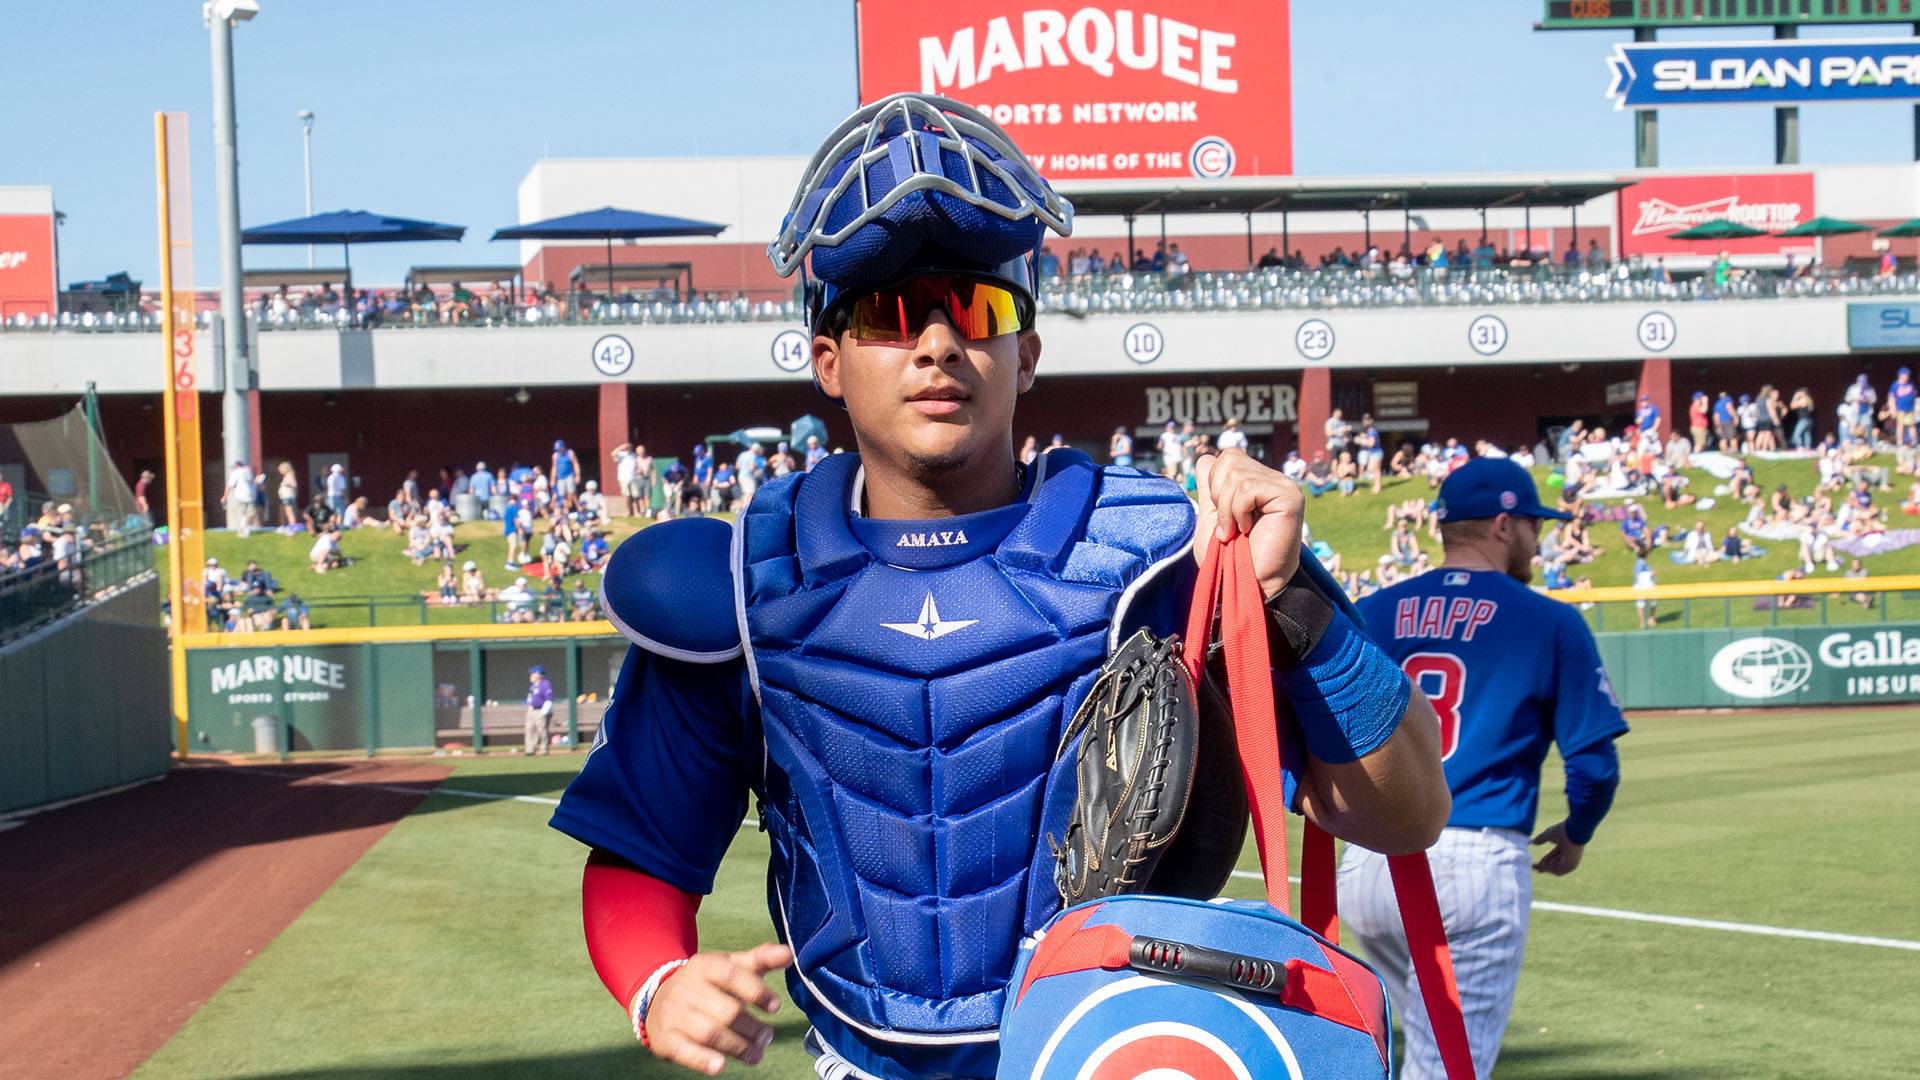 Cubs prospect profile: Miguel Amaya - Marquee Sports Network